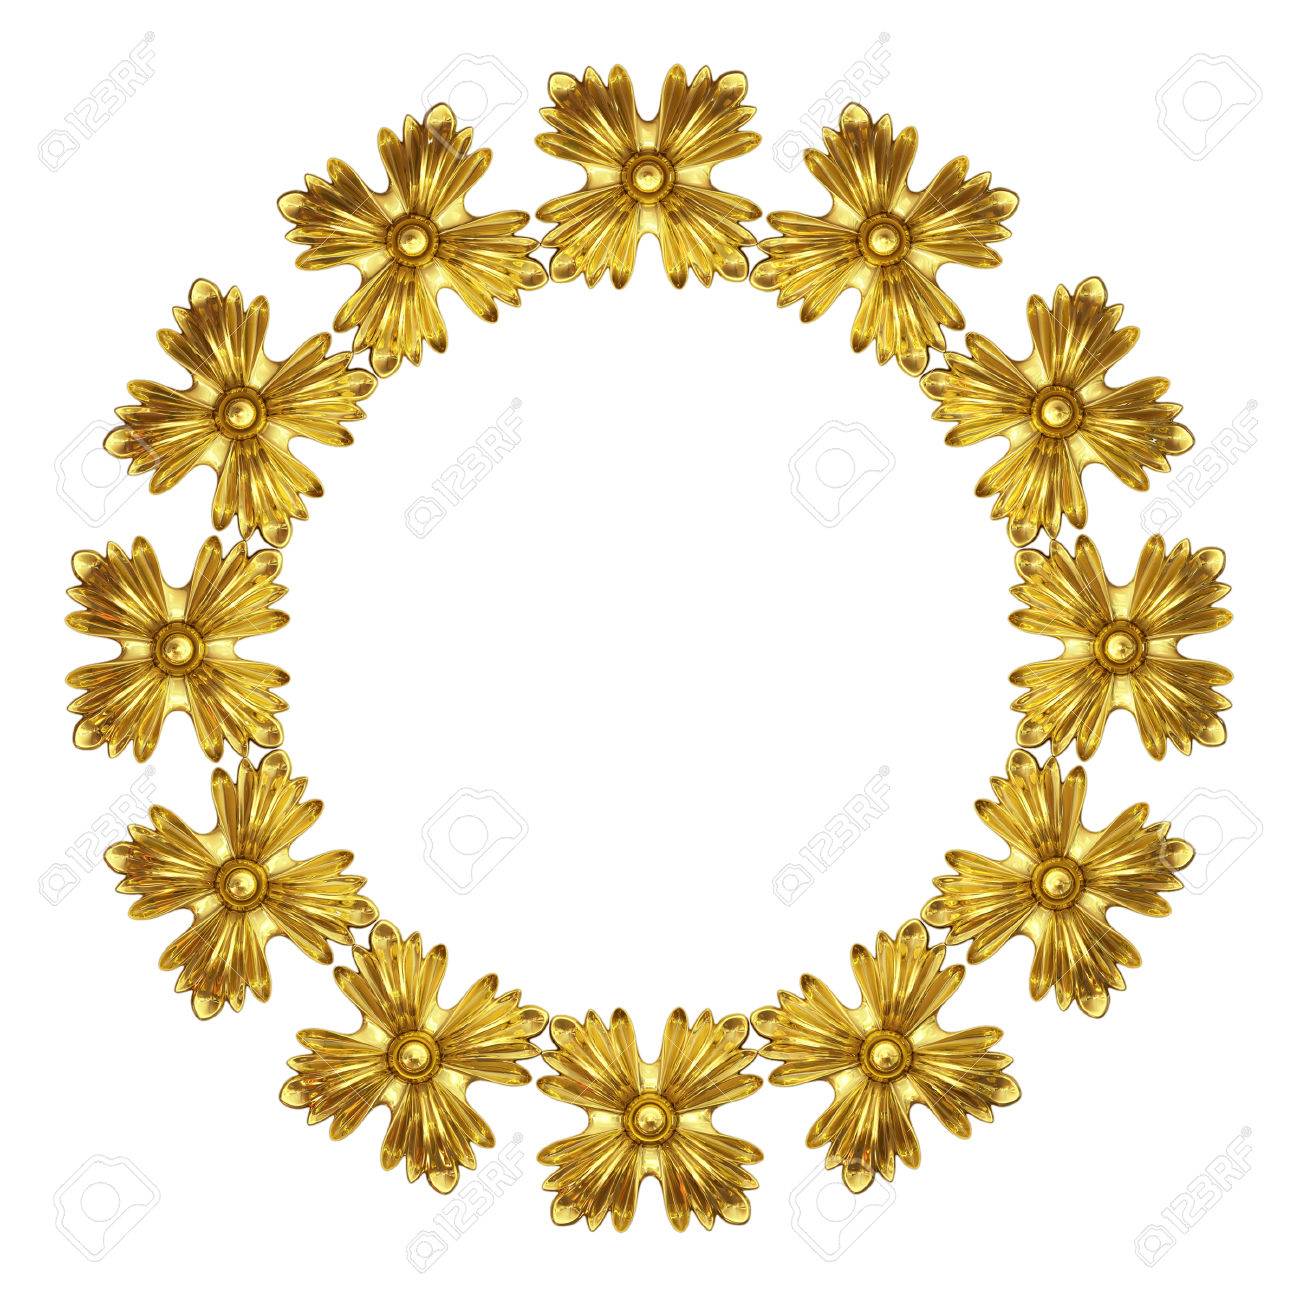 3d Fretwork Made Of Gold On A White Background Stock Photo